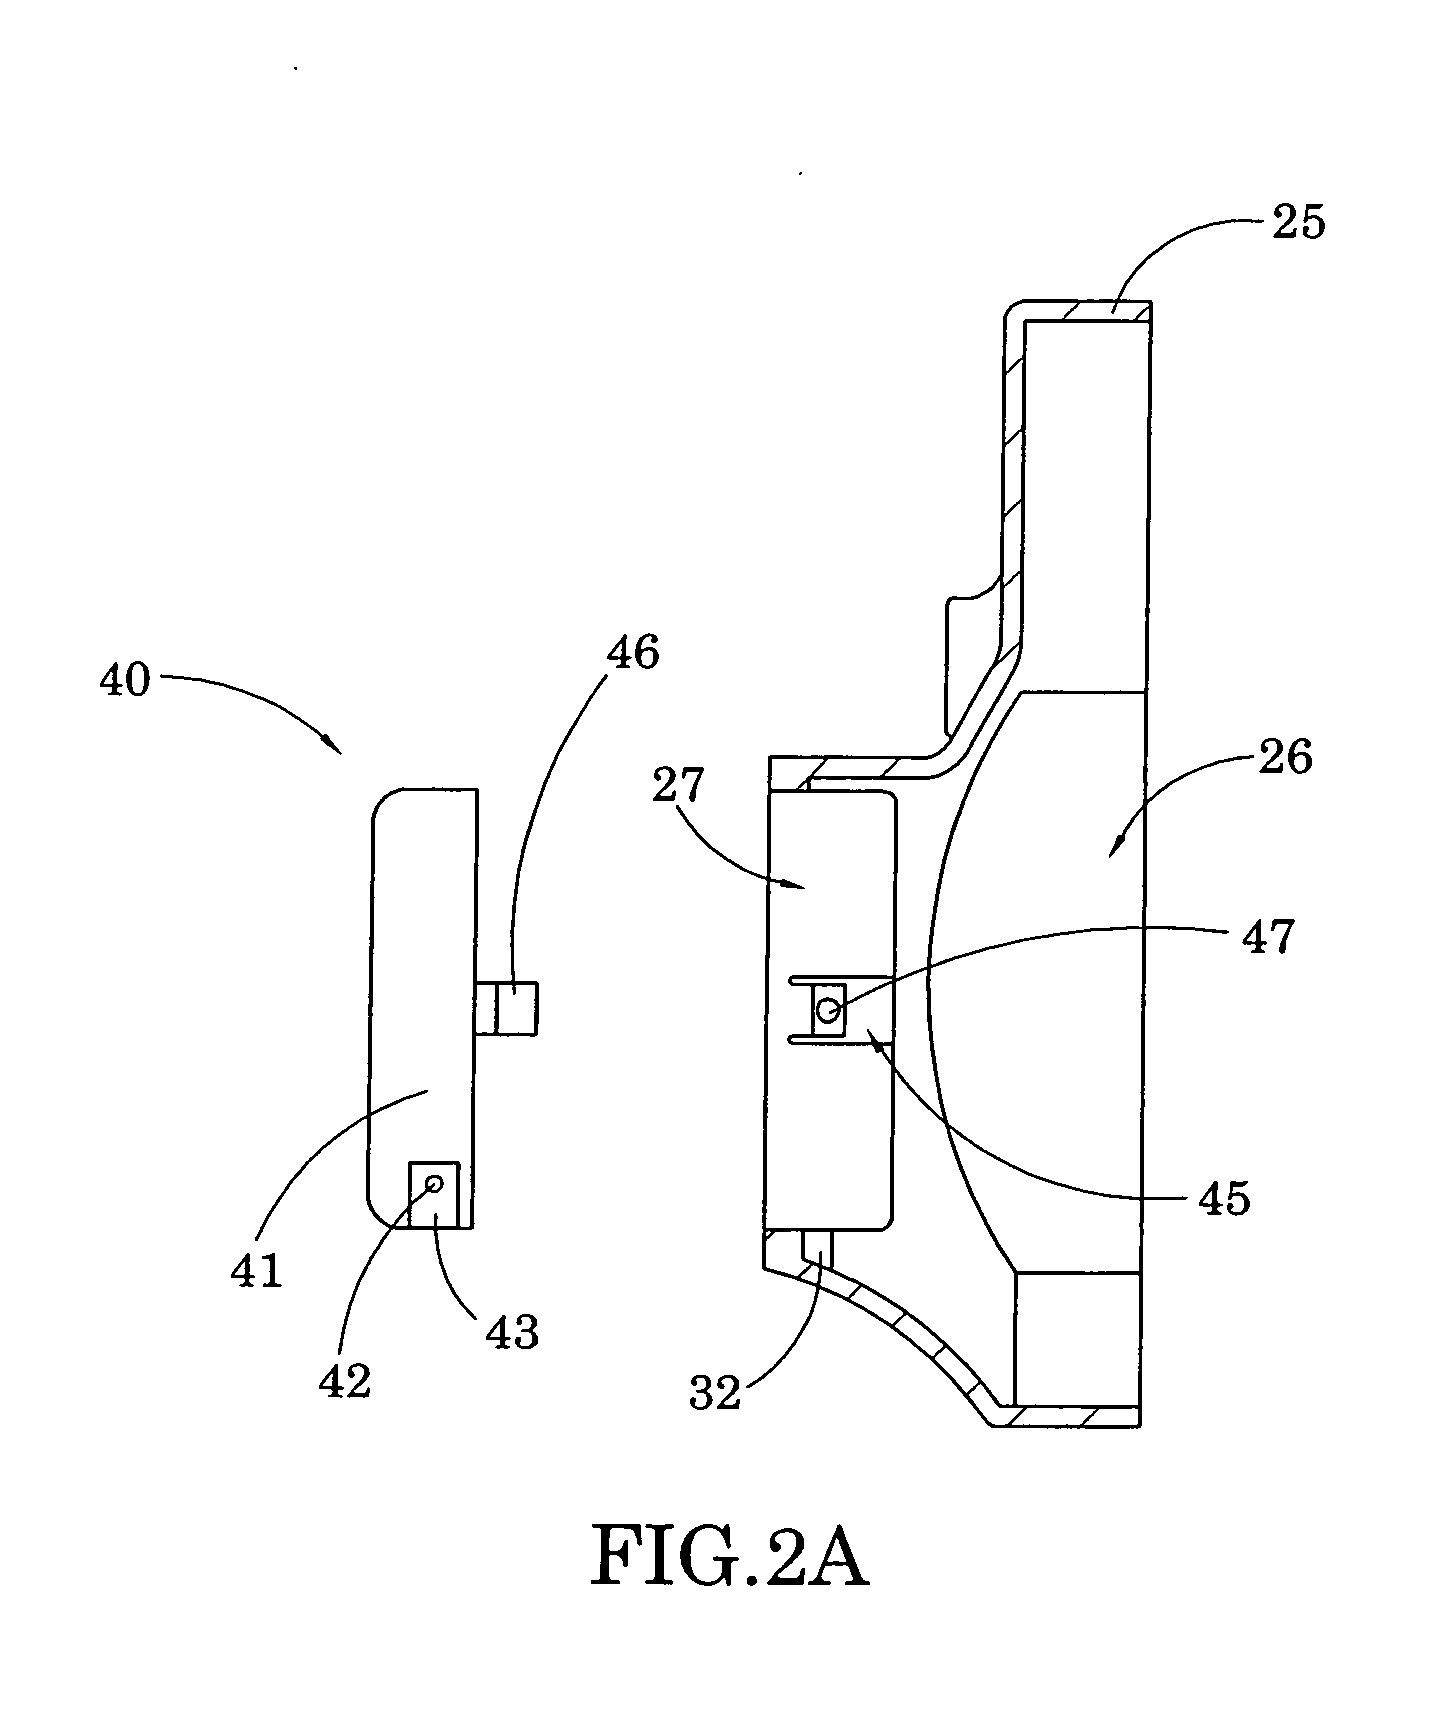 Electrical arrangement of shading device